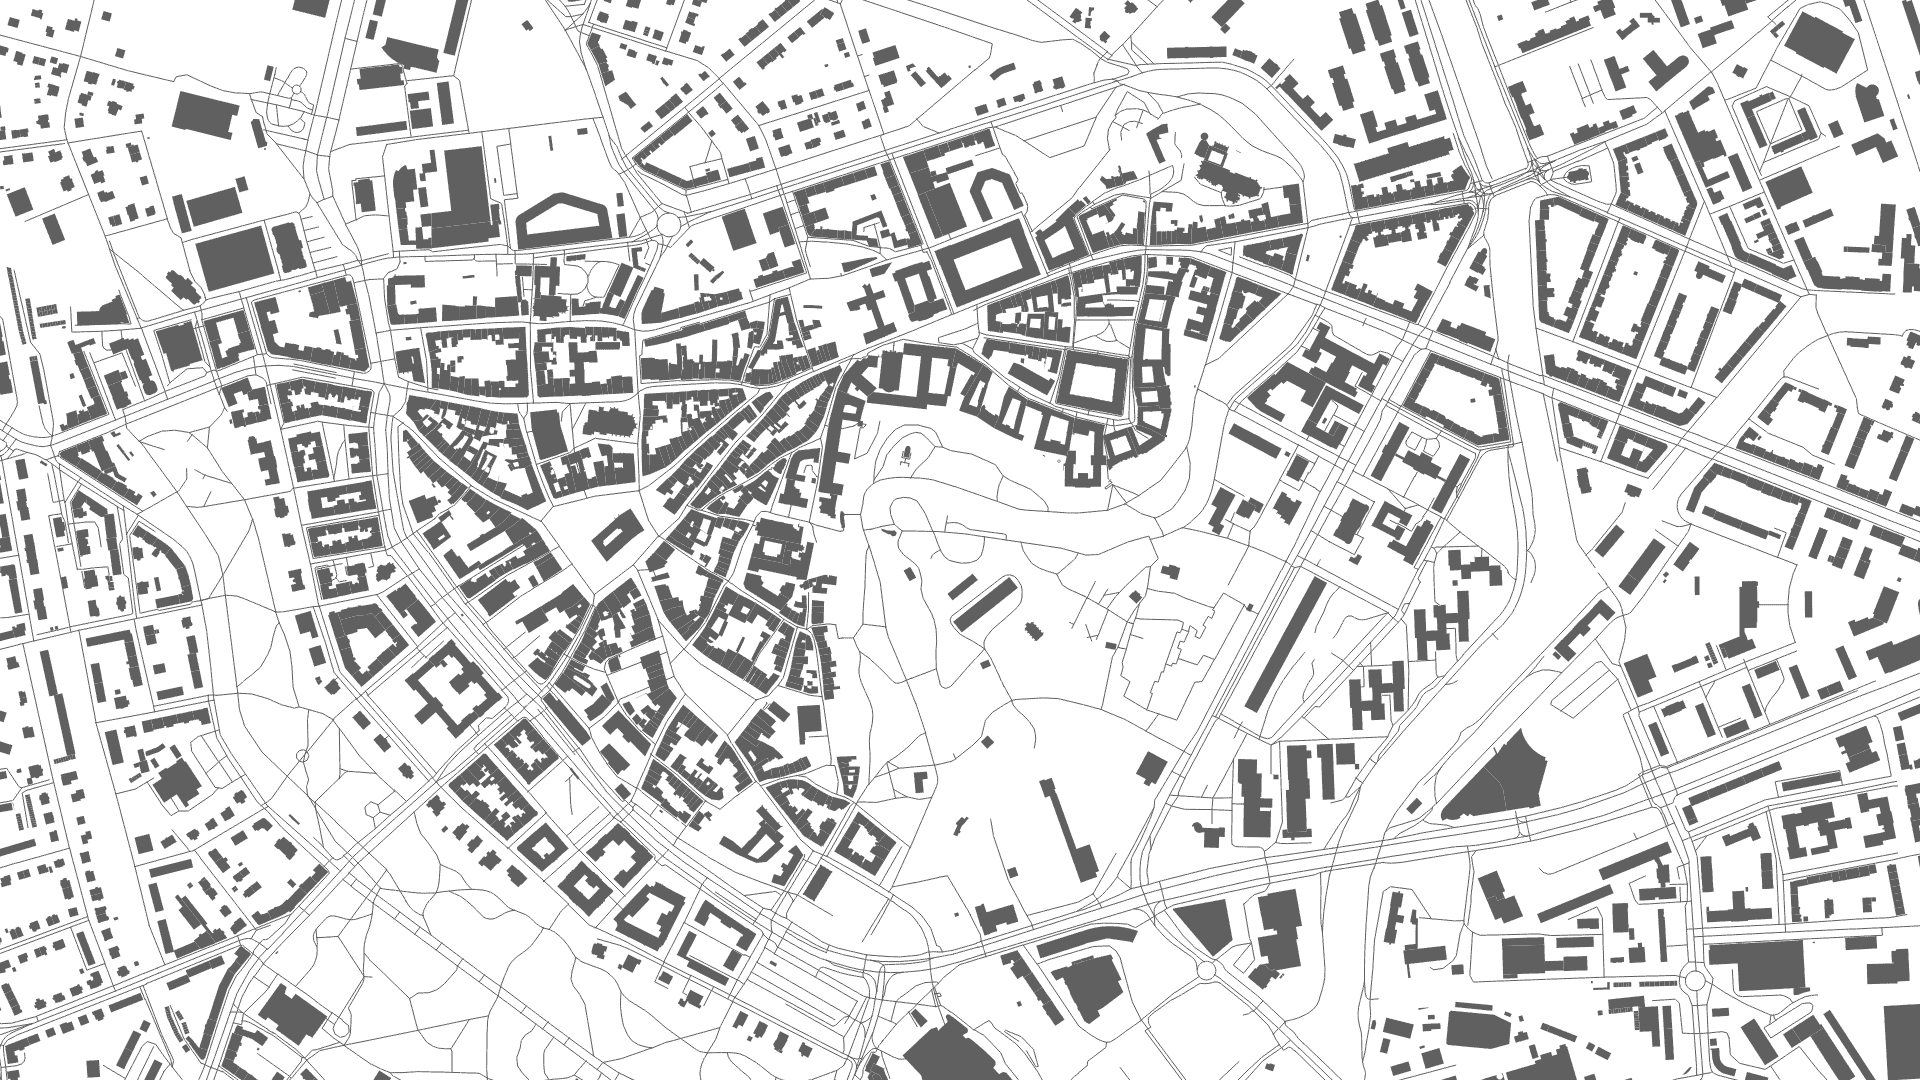 Black and white map of Olomouc